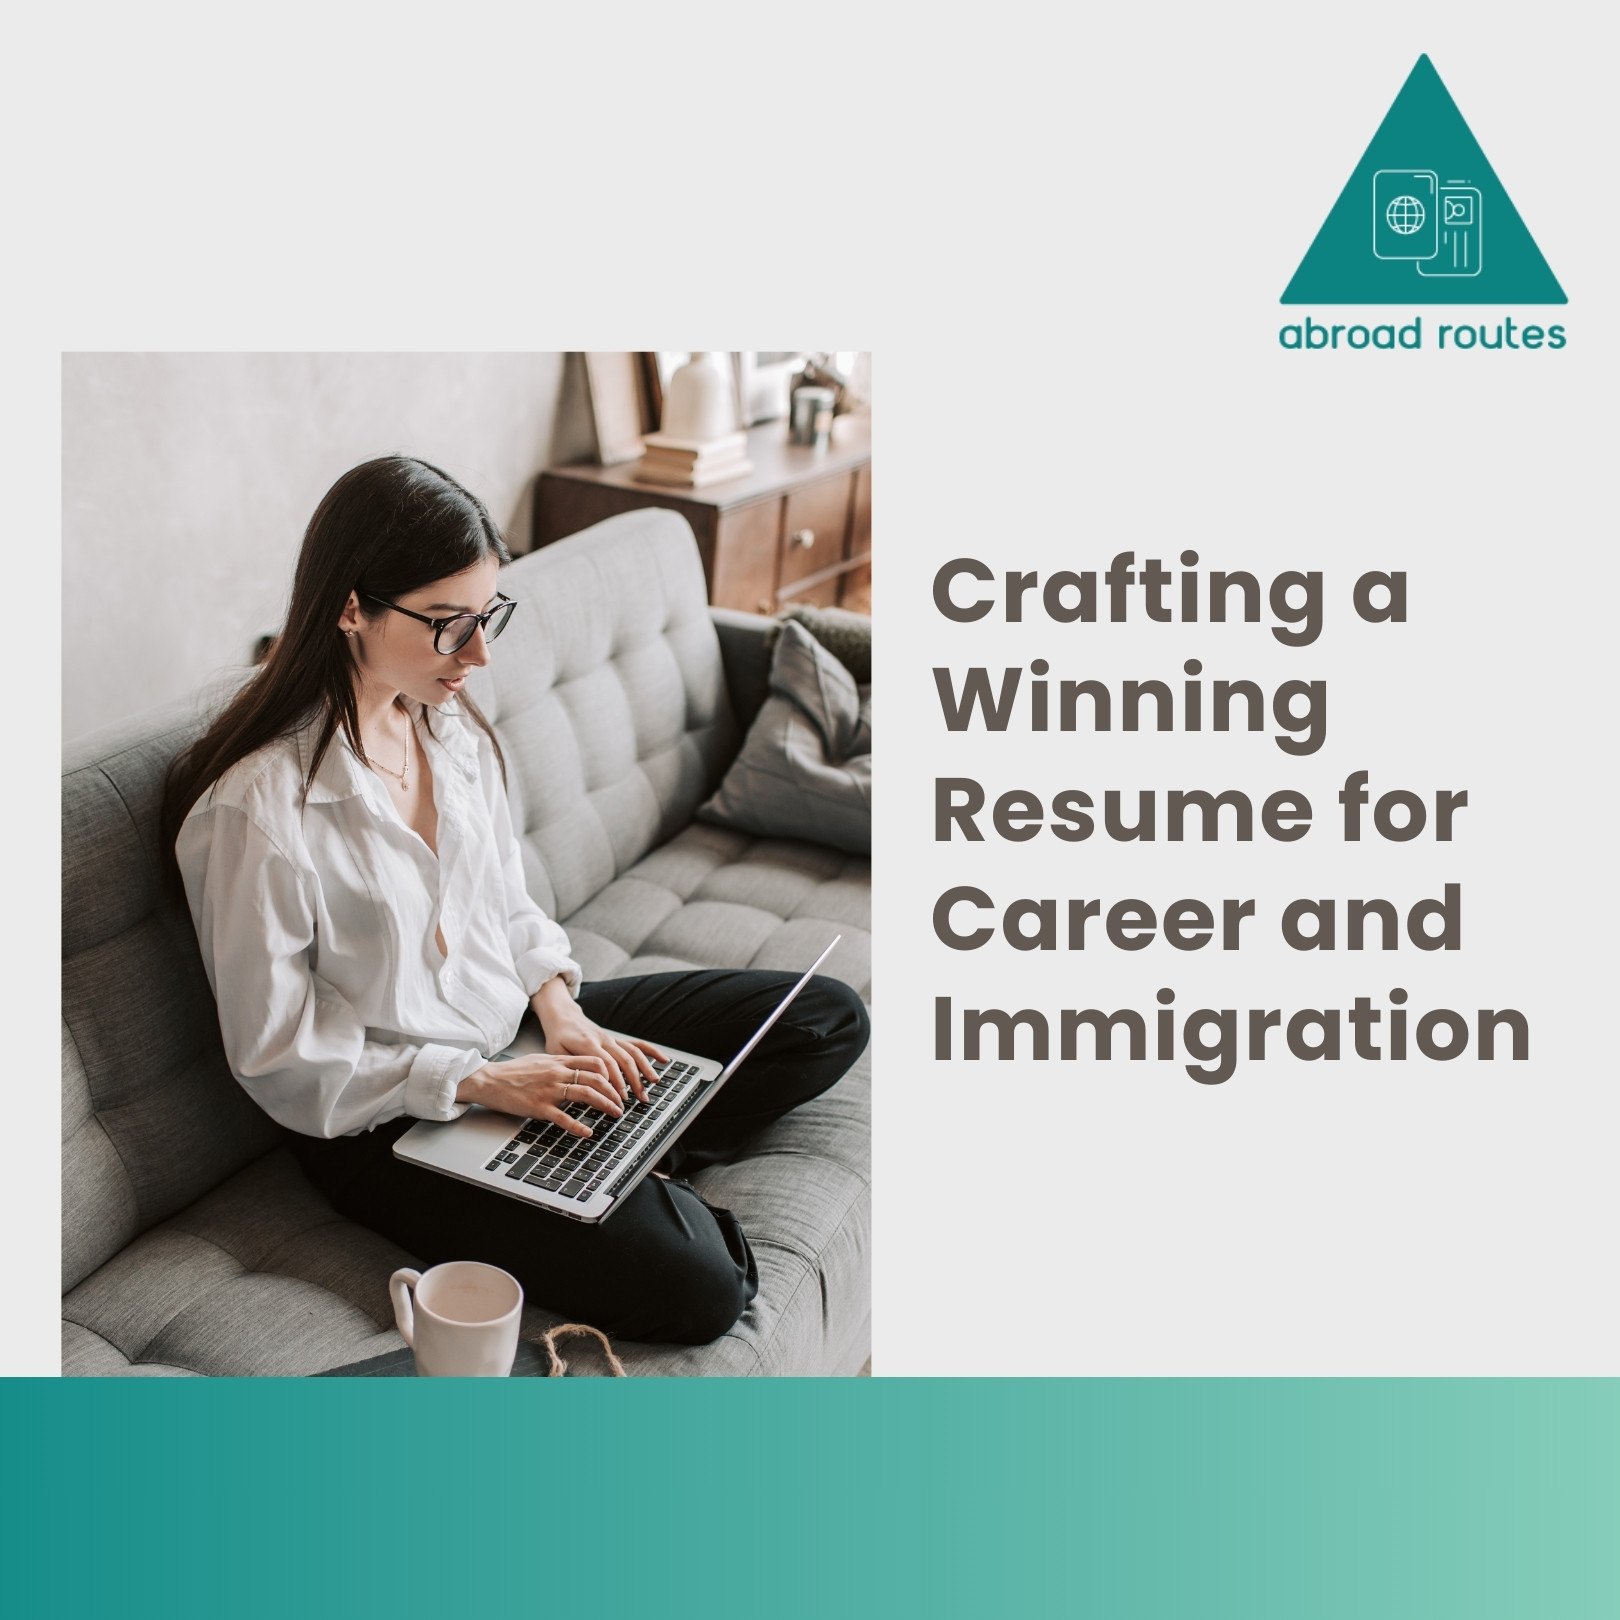 How to Crafting a Winning Resume for Career and Immigration